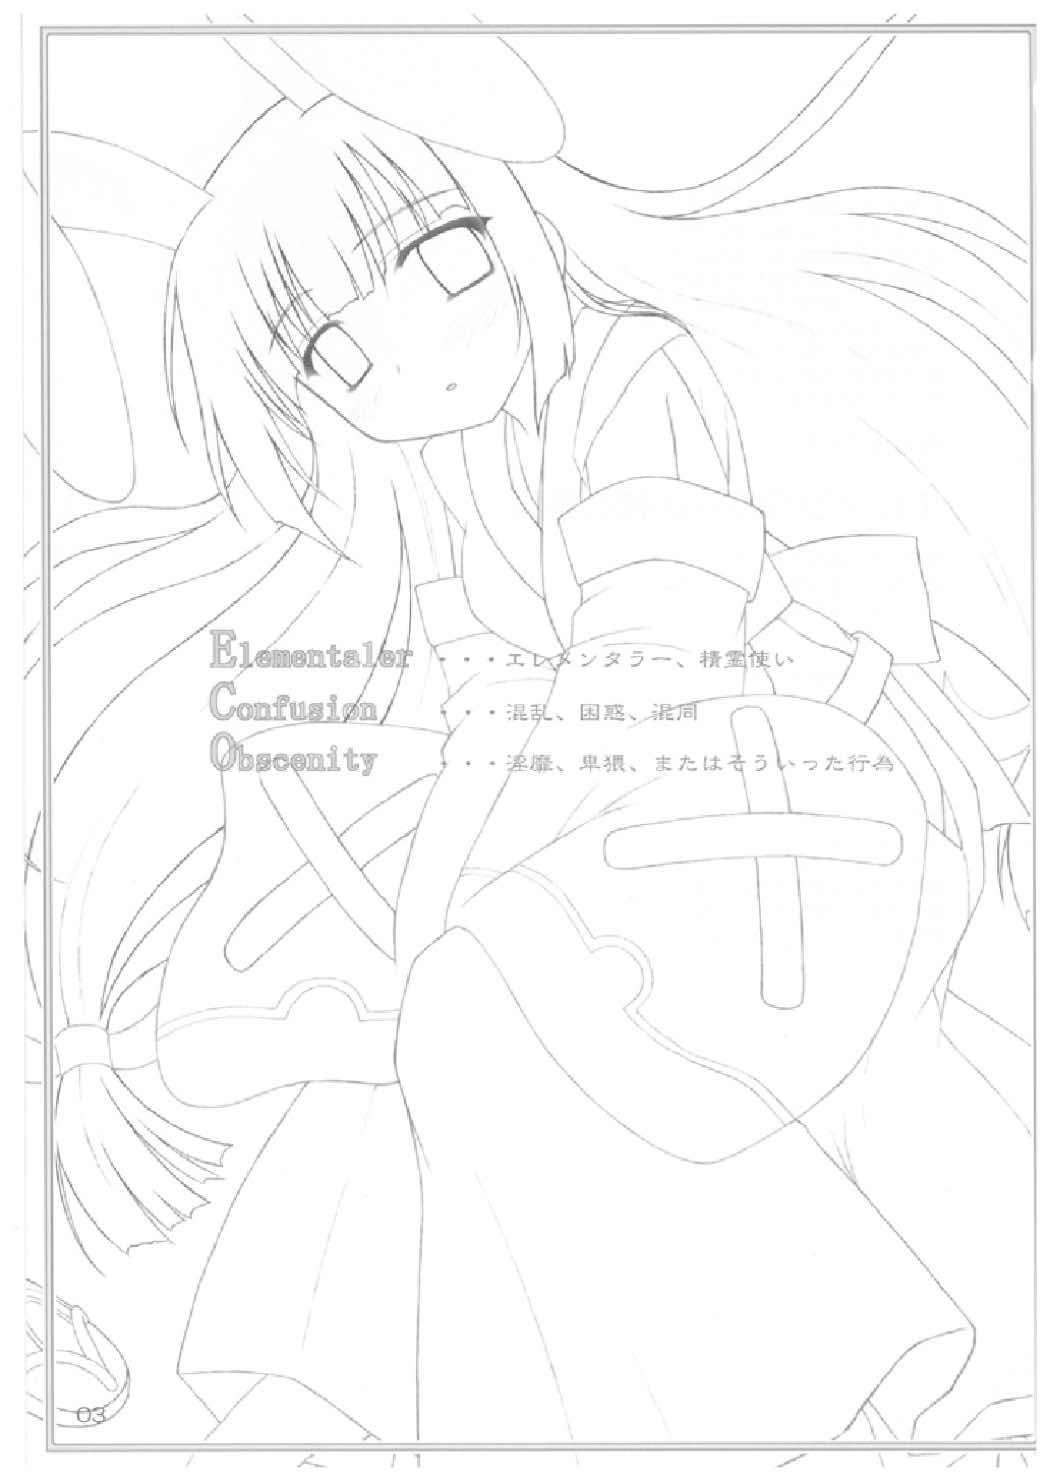 Scene Elementaler Confusion Obscenity - Emil chronicle online Ass To Mouth - Page 3